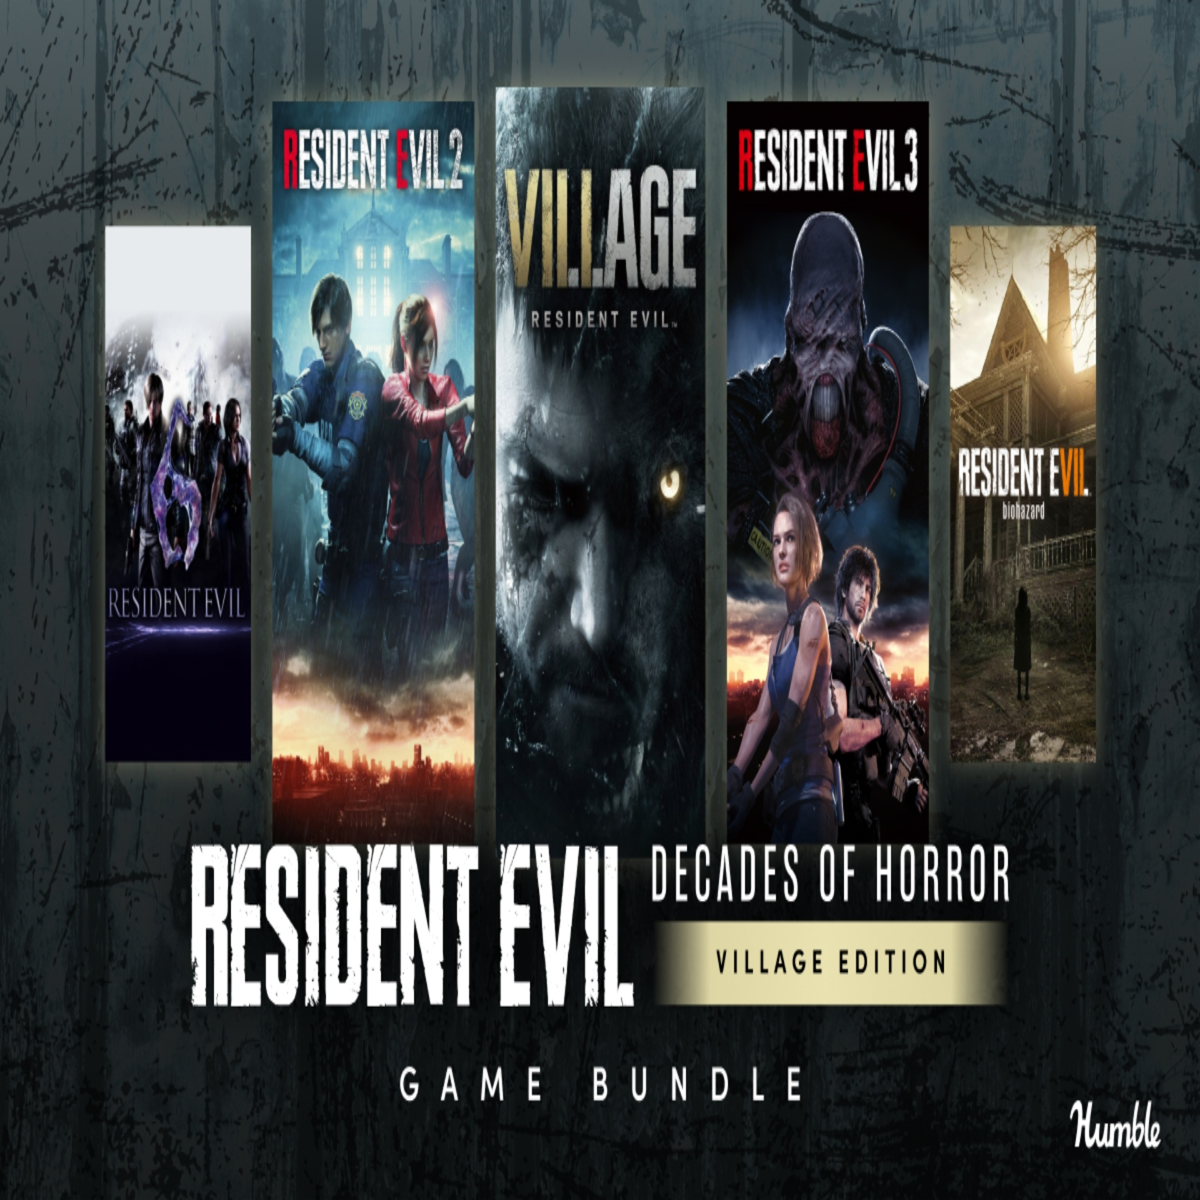 Resident Evil Humble Bundle is an offer you can't refuse